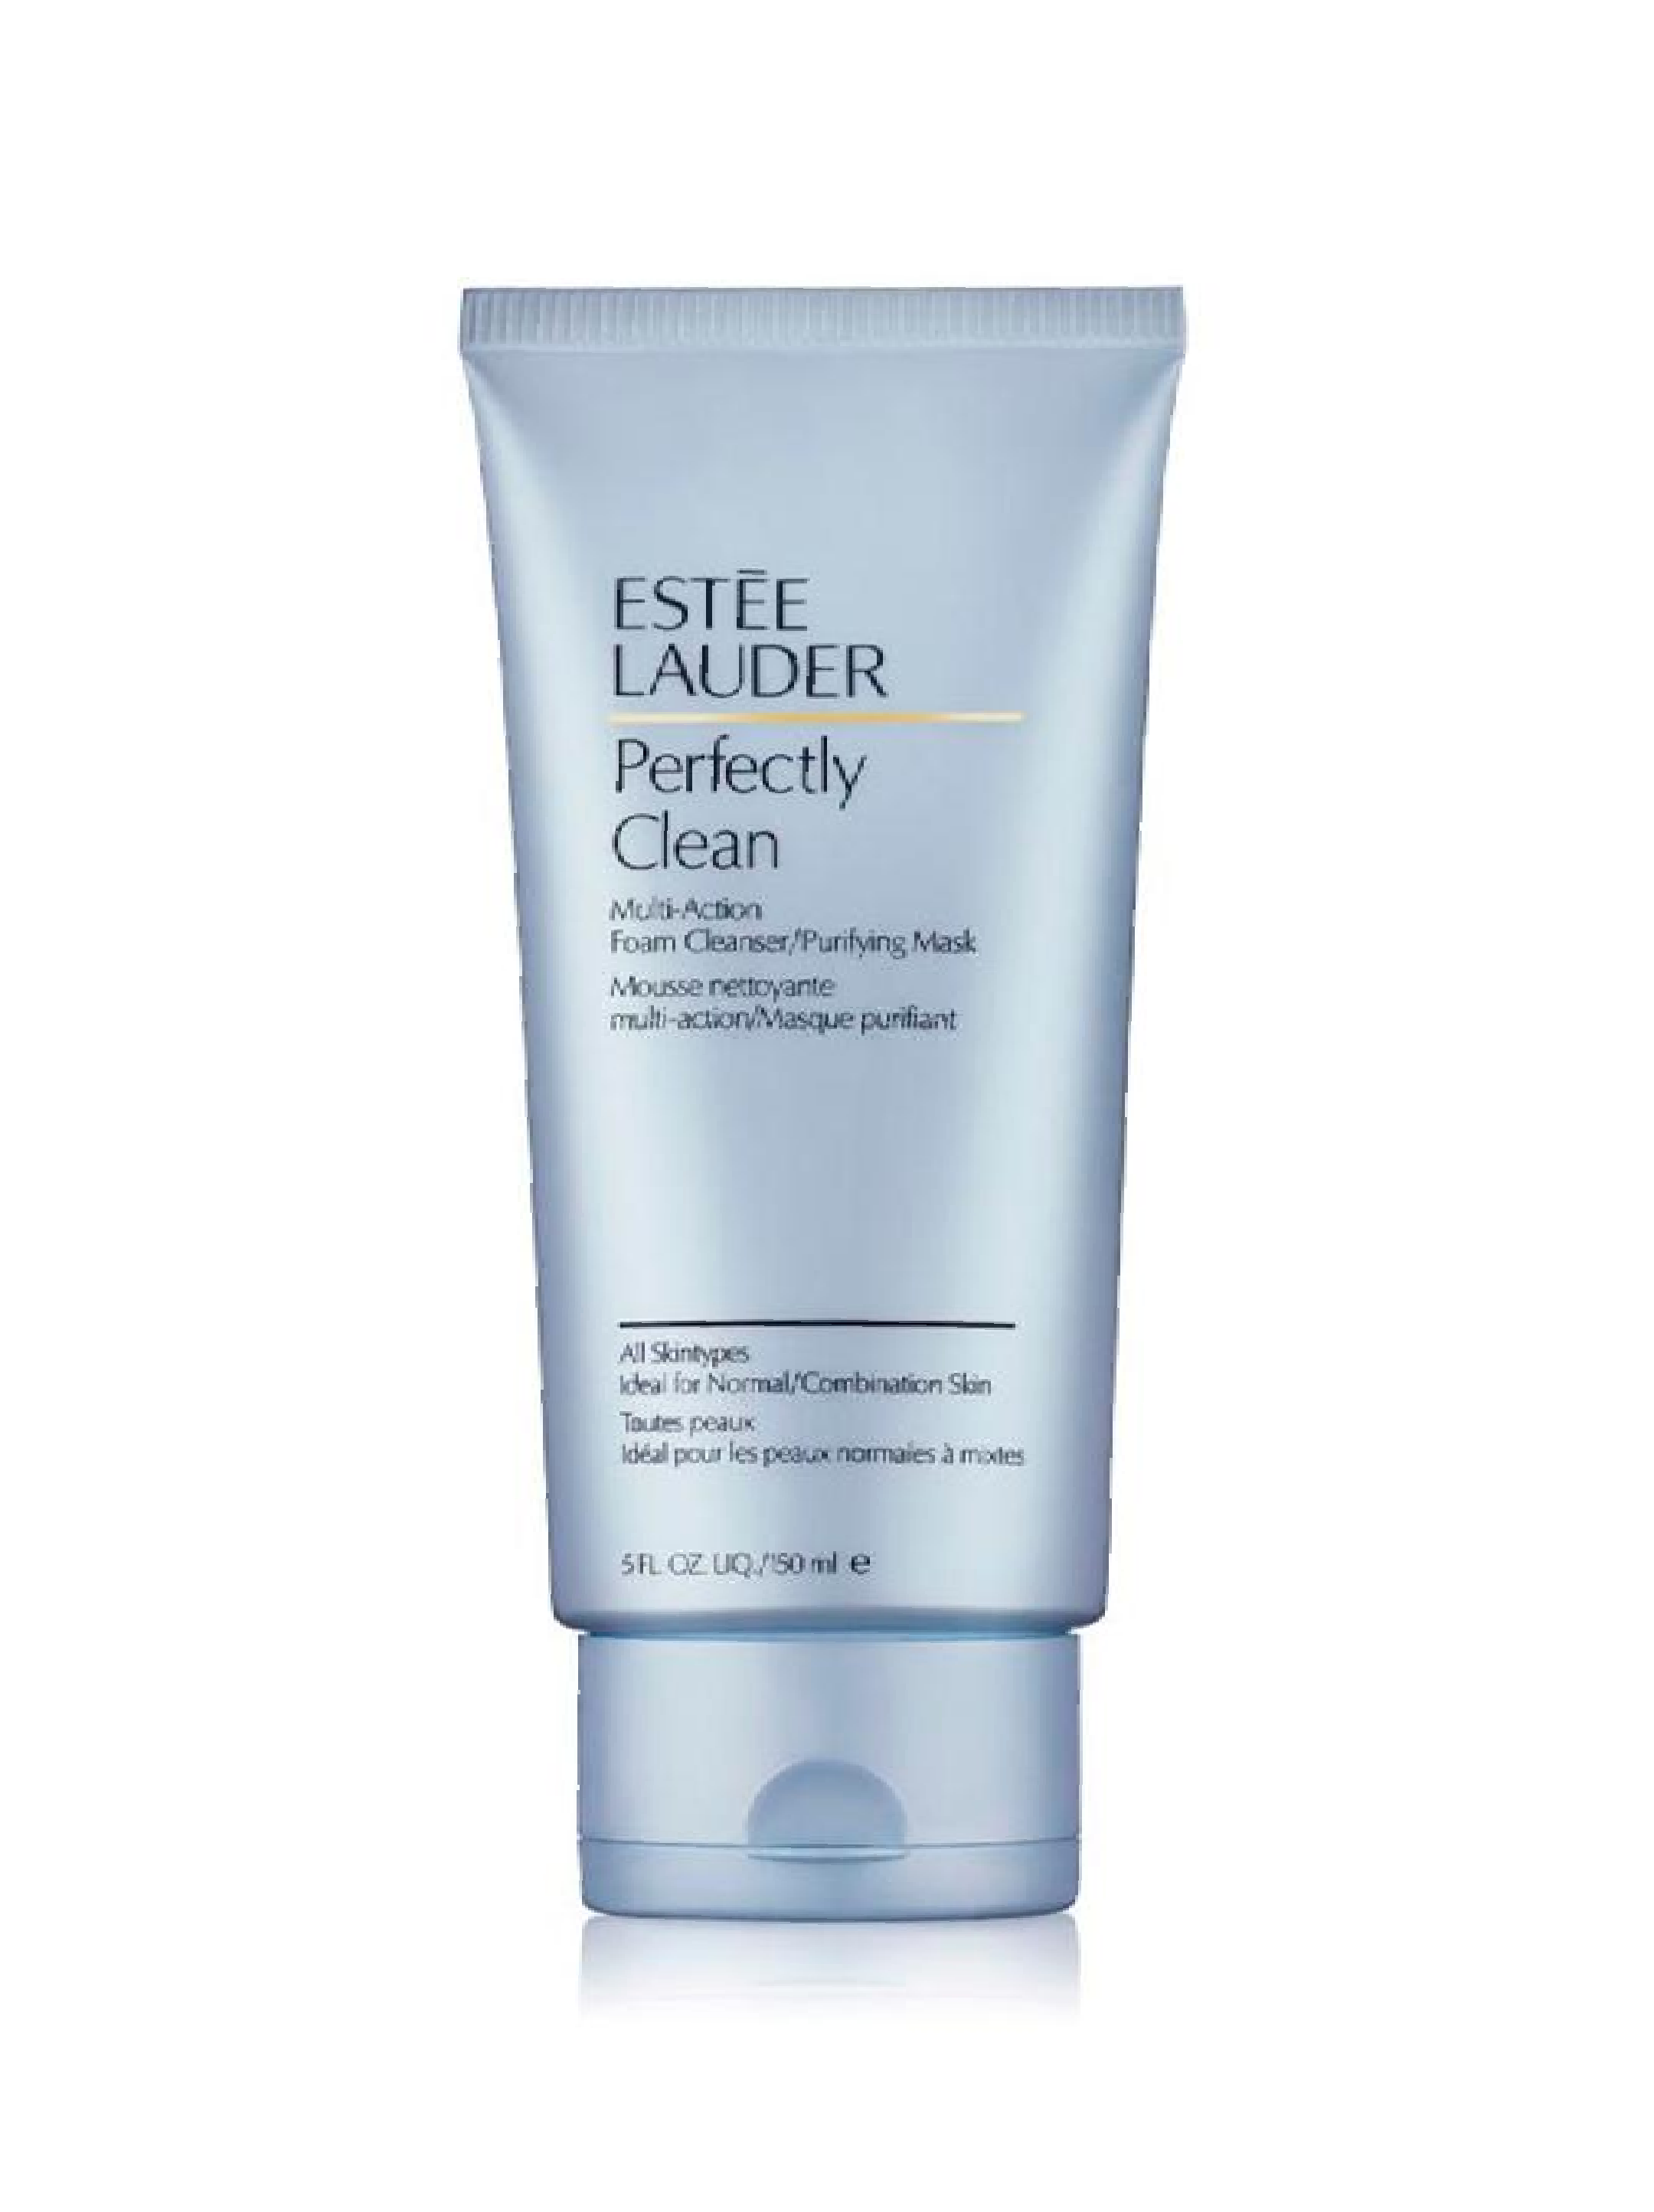 Multi cleanser. Estee Lauder perfectly clean Multi-Action Foam Cleanser/Purifying Mask. Estee Lauder perfectly clean Multi-Action. Multi Action Foam Cleanser Эсте лаудер. Умывалка Estee Lauder perfectly clean.